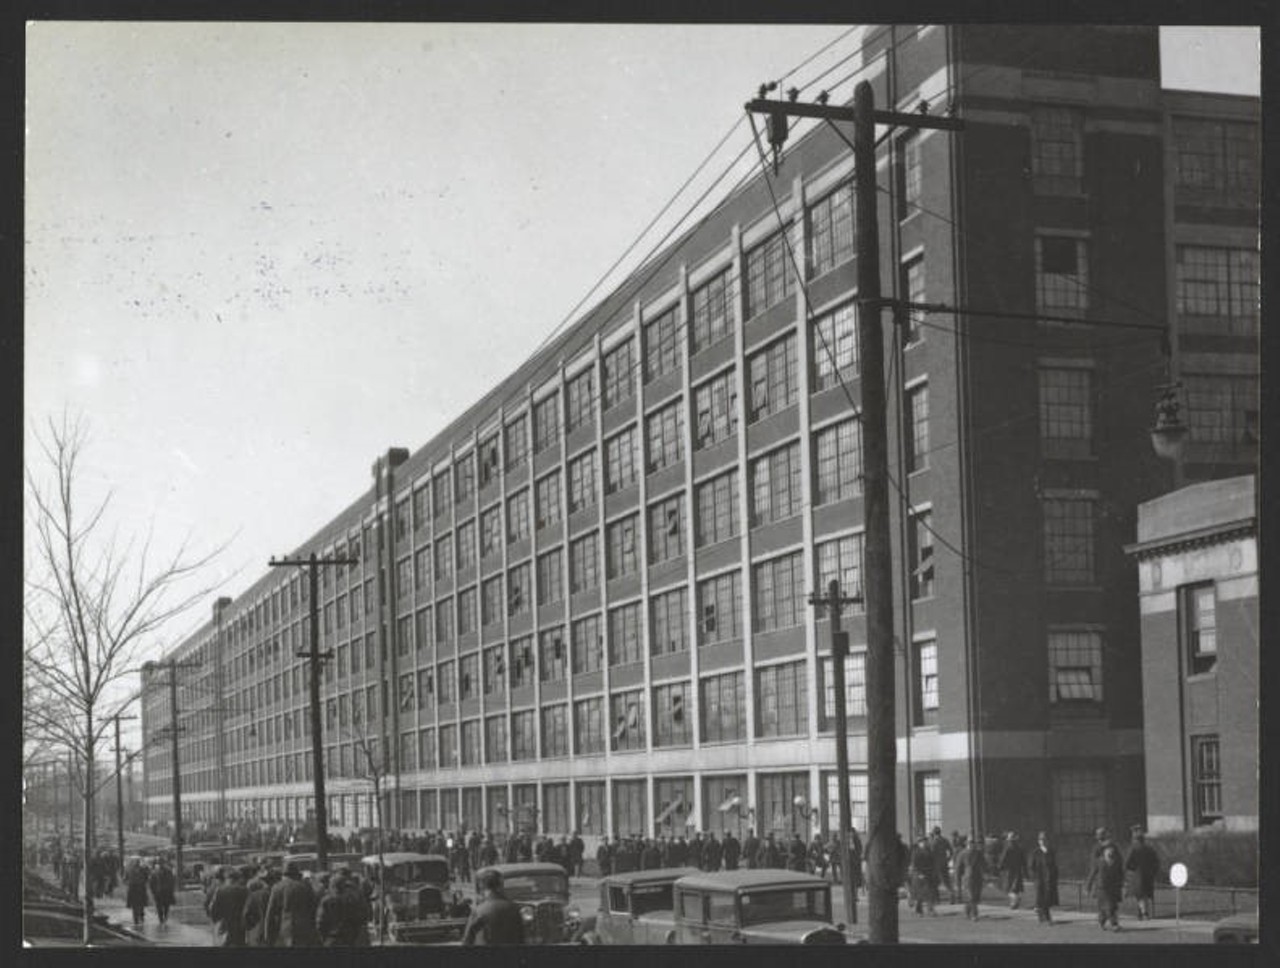 Factory located on St.Clair Avenue. On account of a strike of the Chevrolet Motor plant in Toledo, this plant was closed down in April, 1935 and 9,000 men were temporarily thrown out of work. The picture shows a view of the factory and some of the idle men. Fisher Body became a division of General Motors in 1926.